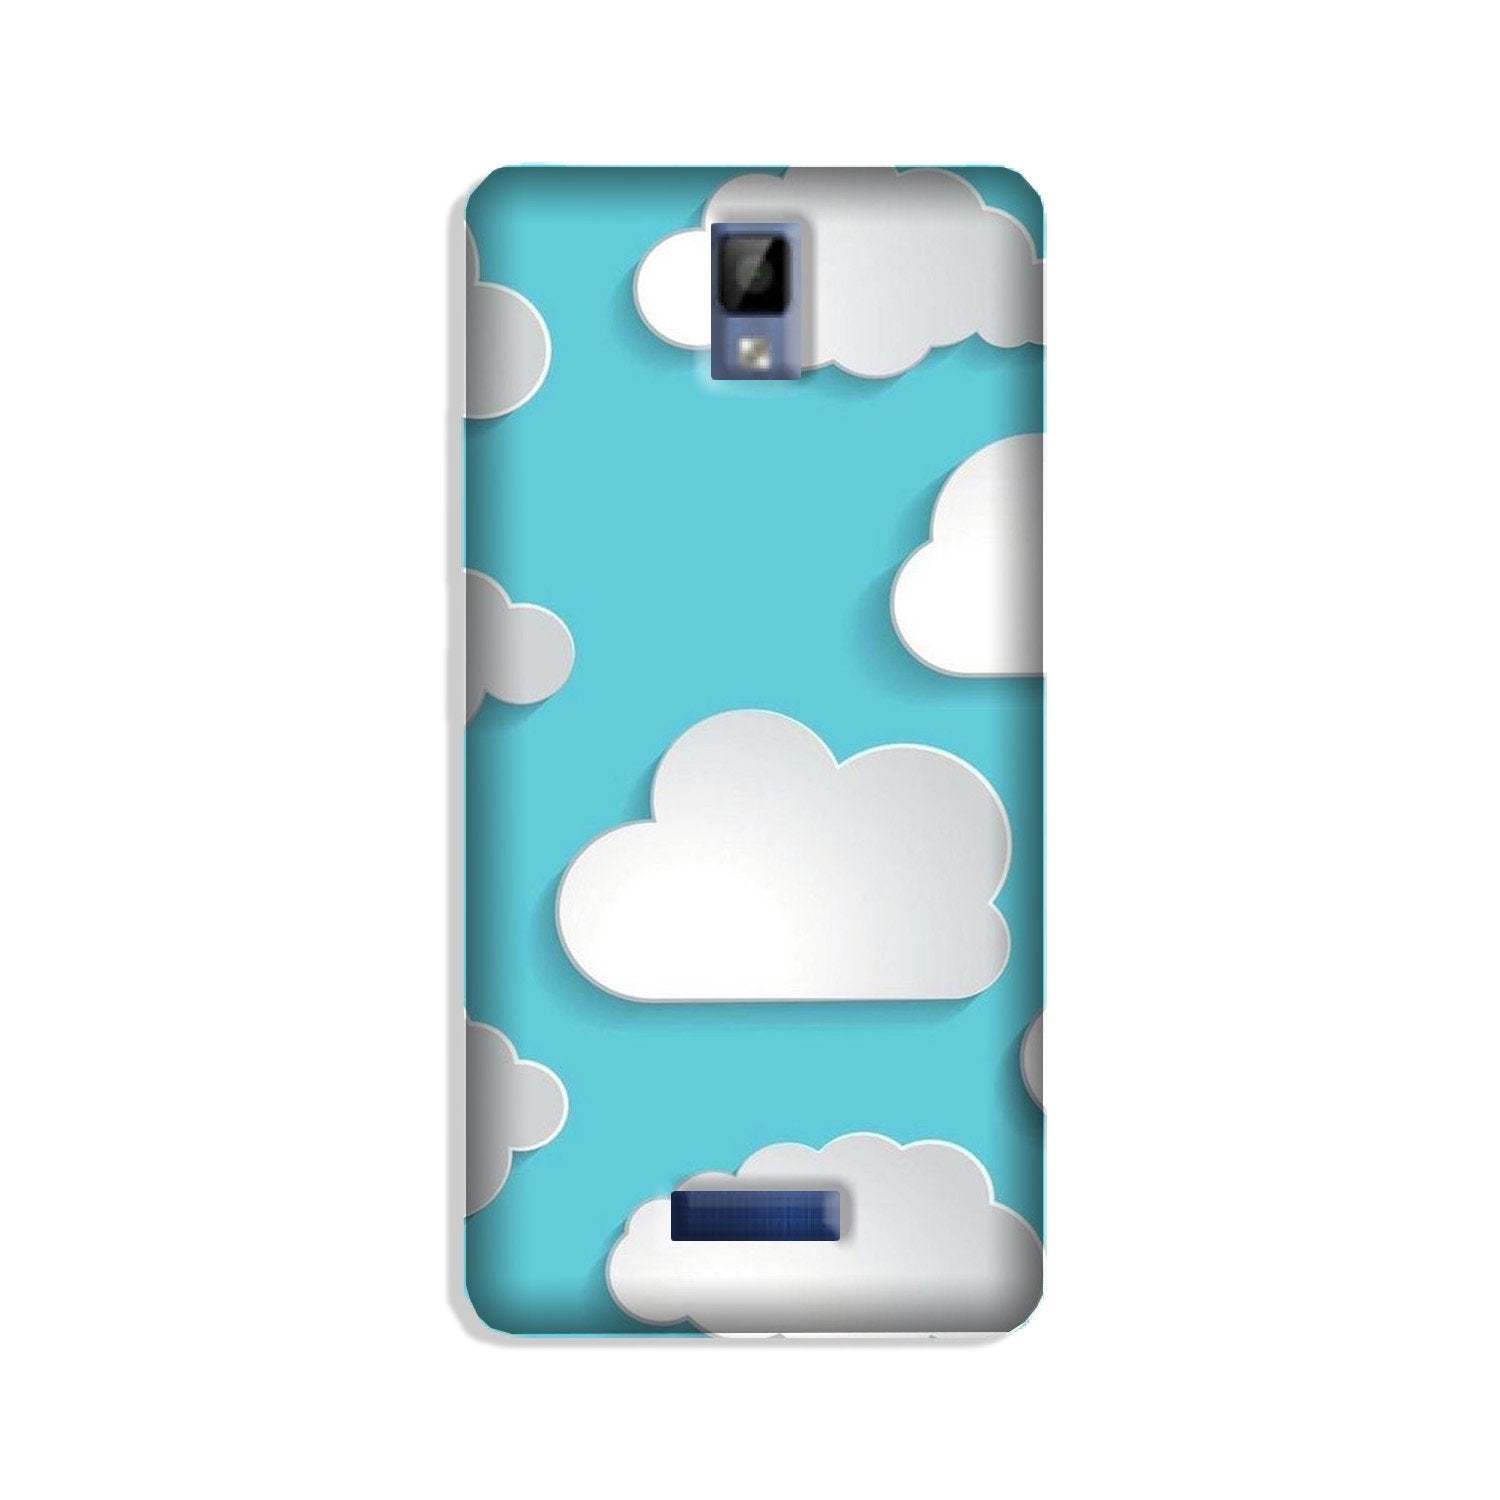 Clouds Case for Gionee P7 (Design No. 210)